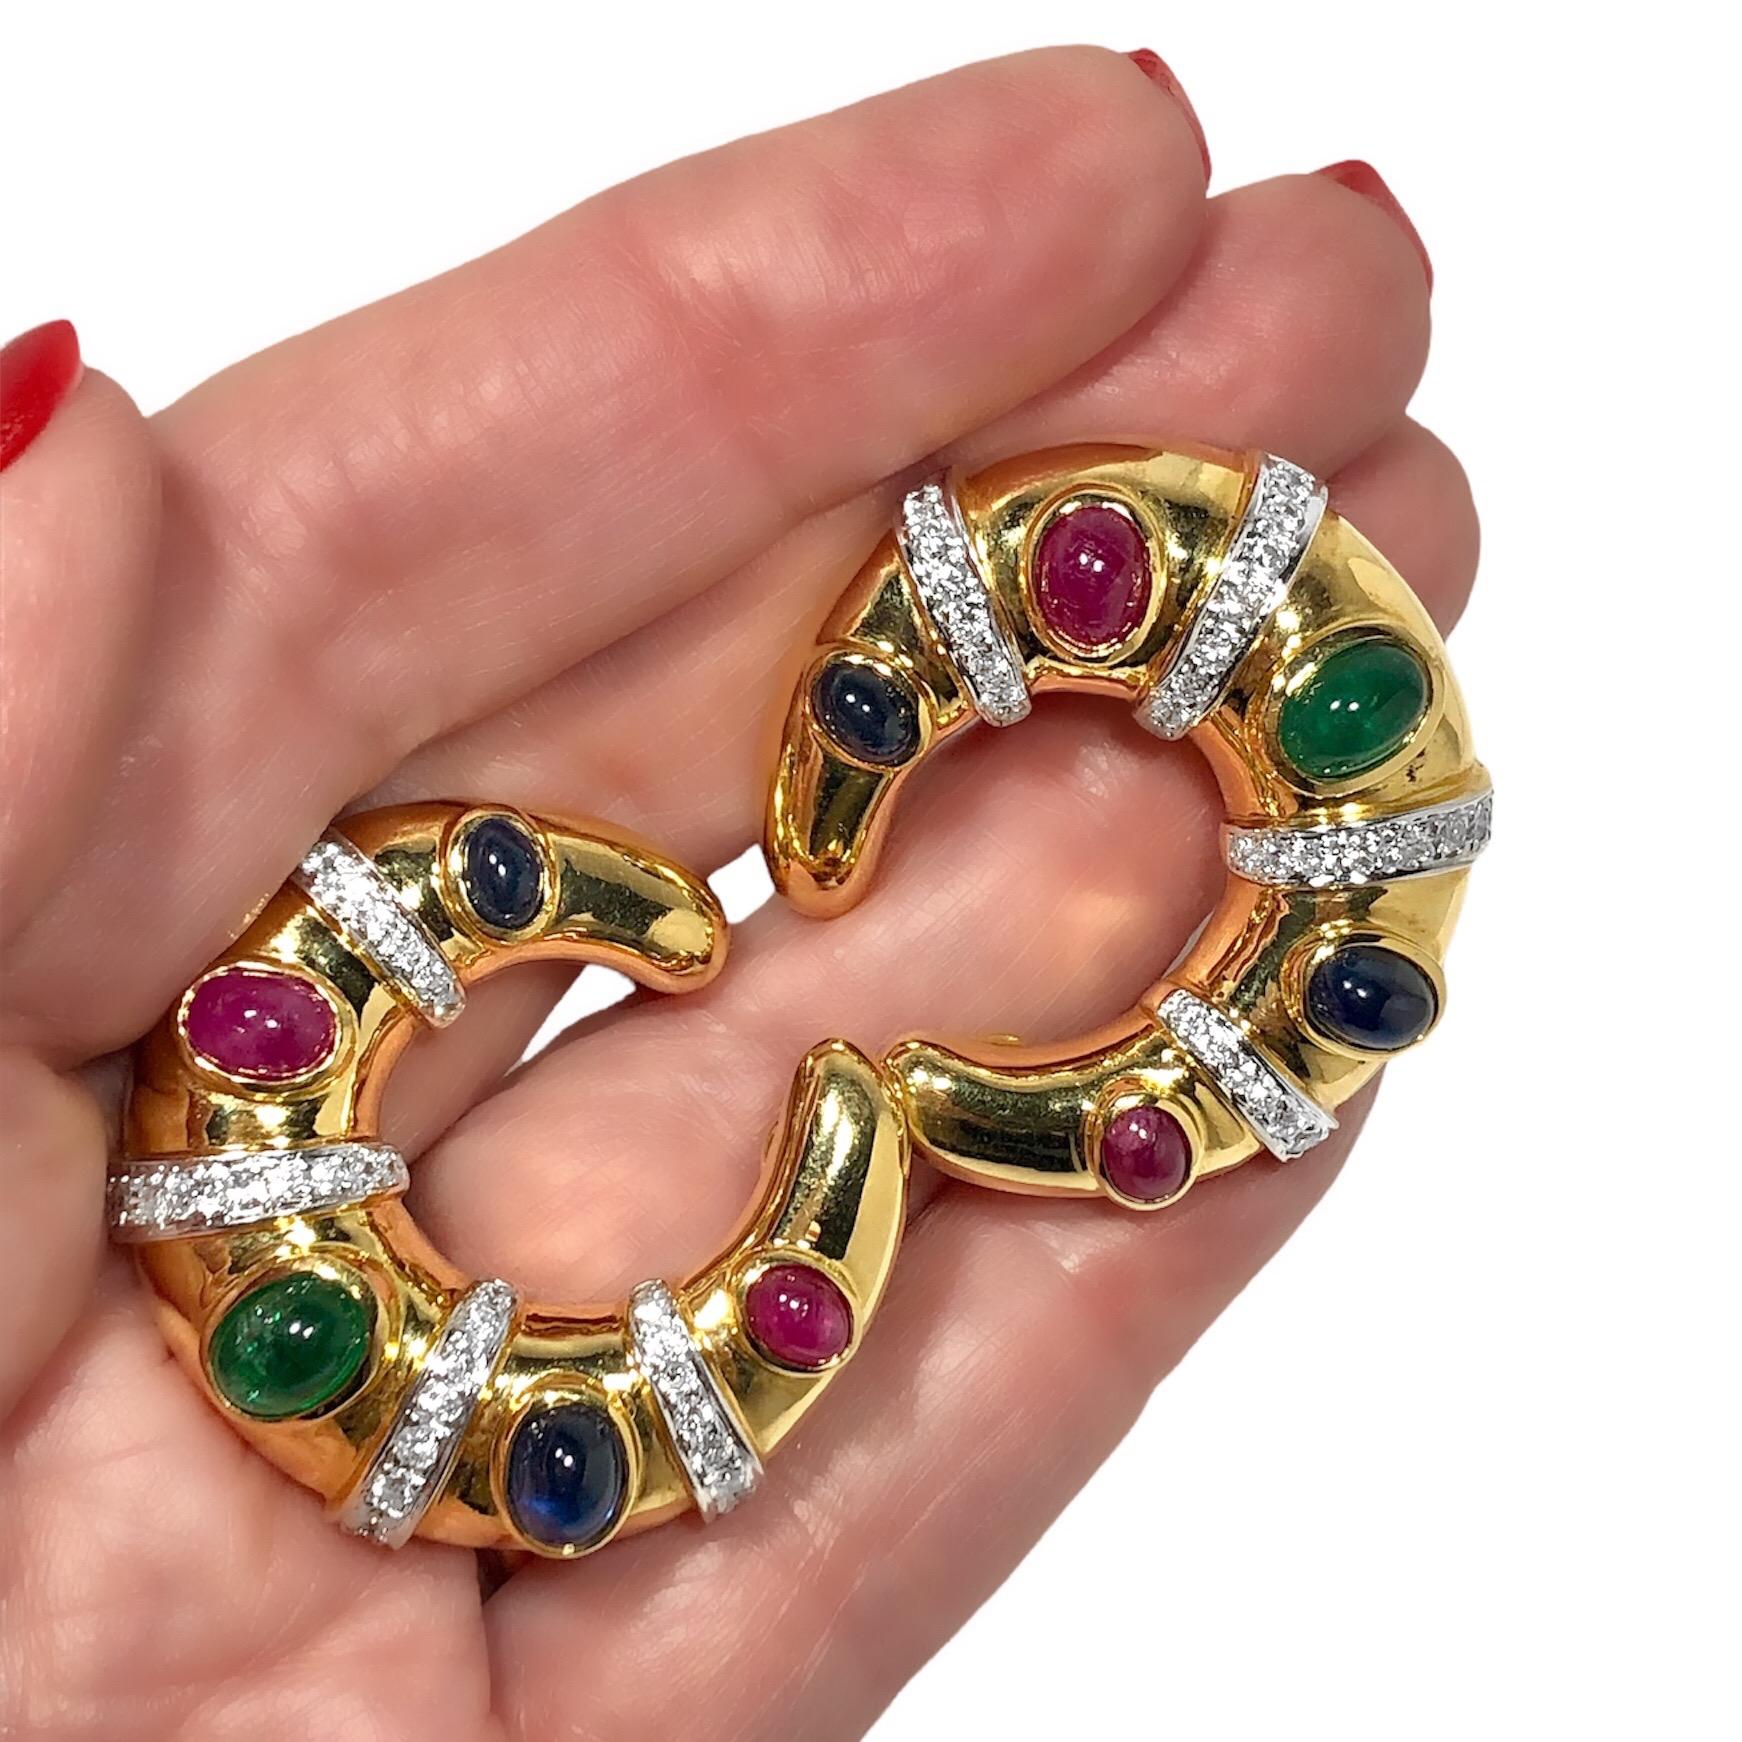 Large 18K Gold Hoops with Diamonds, Cabochon Rubies, Emeralds and Sapphires In Good Condition For Sale In Palm Beach, FL